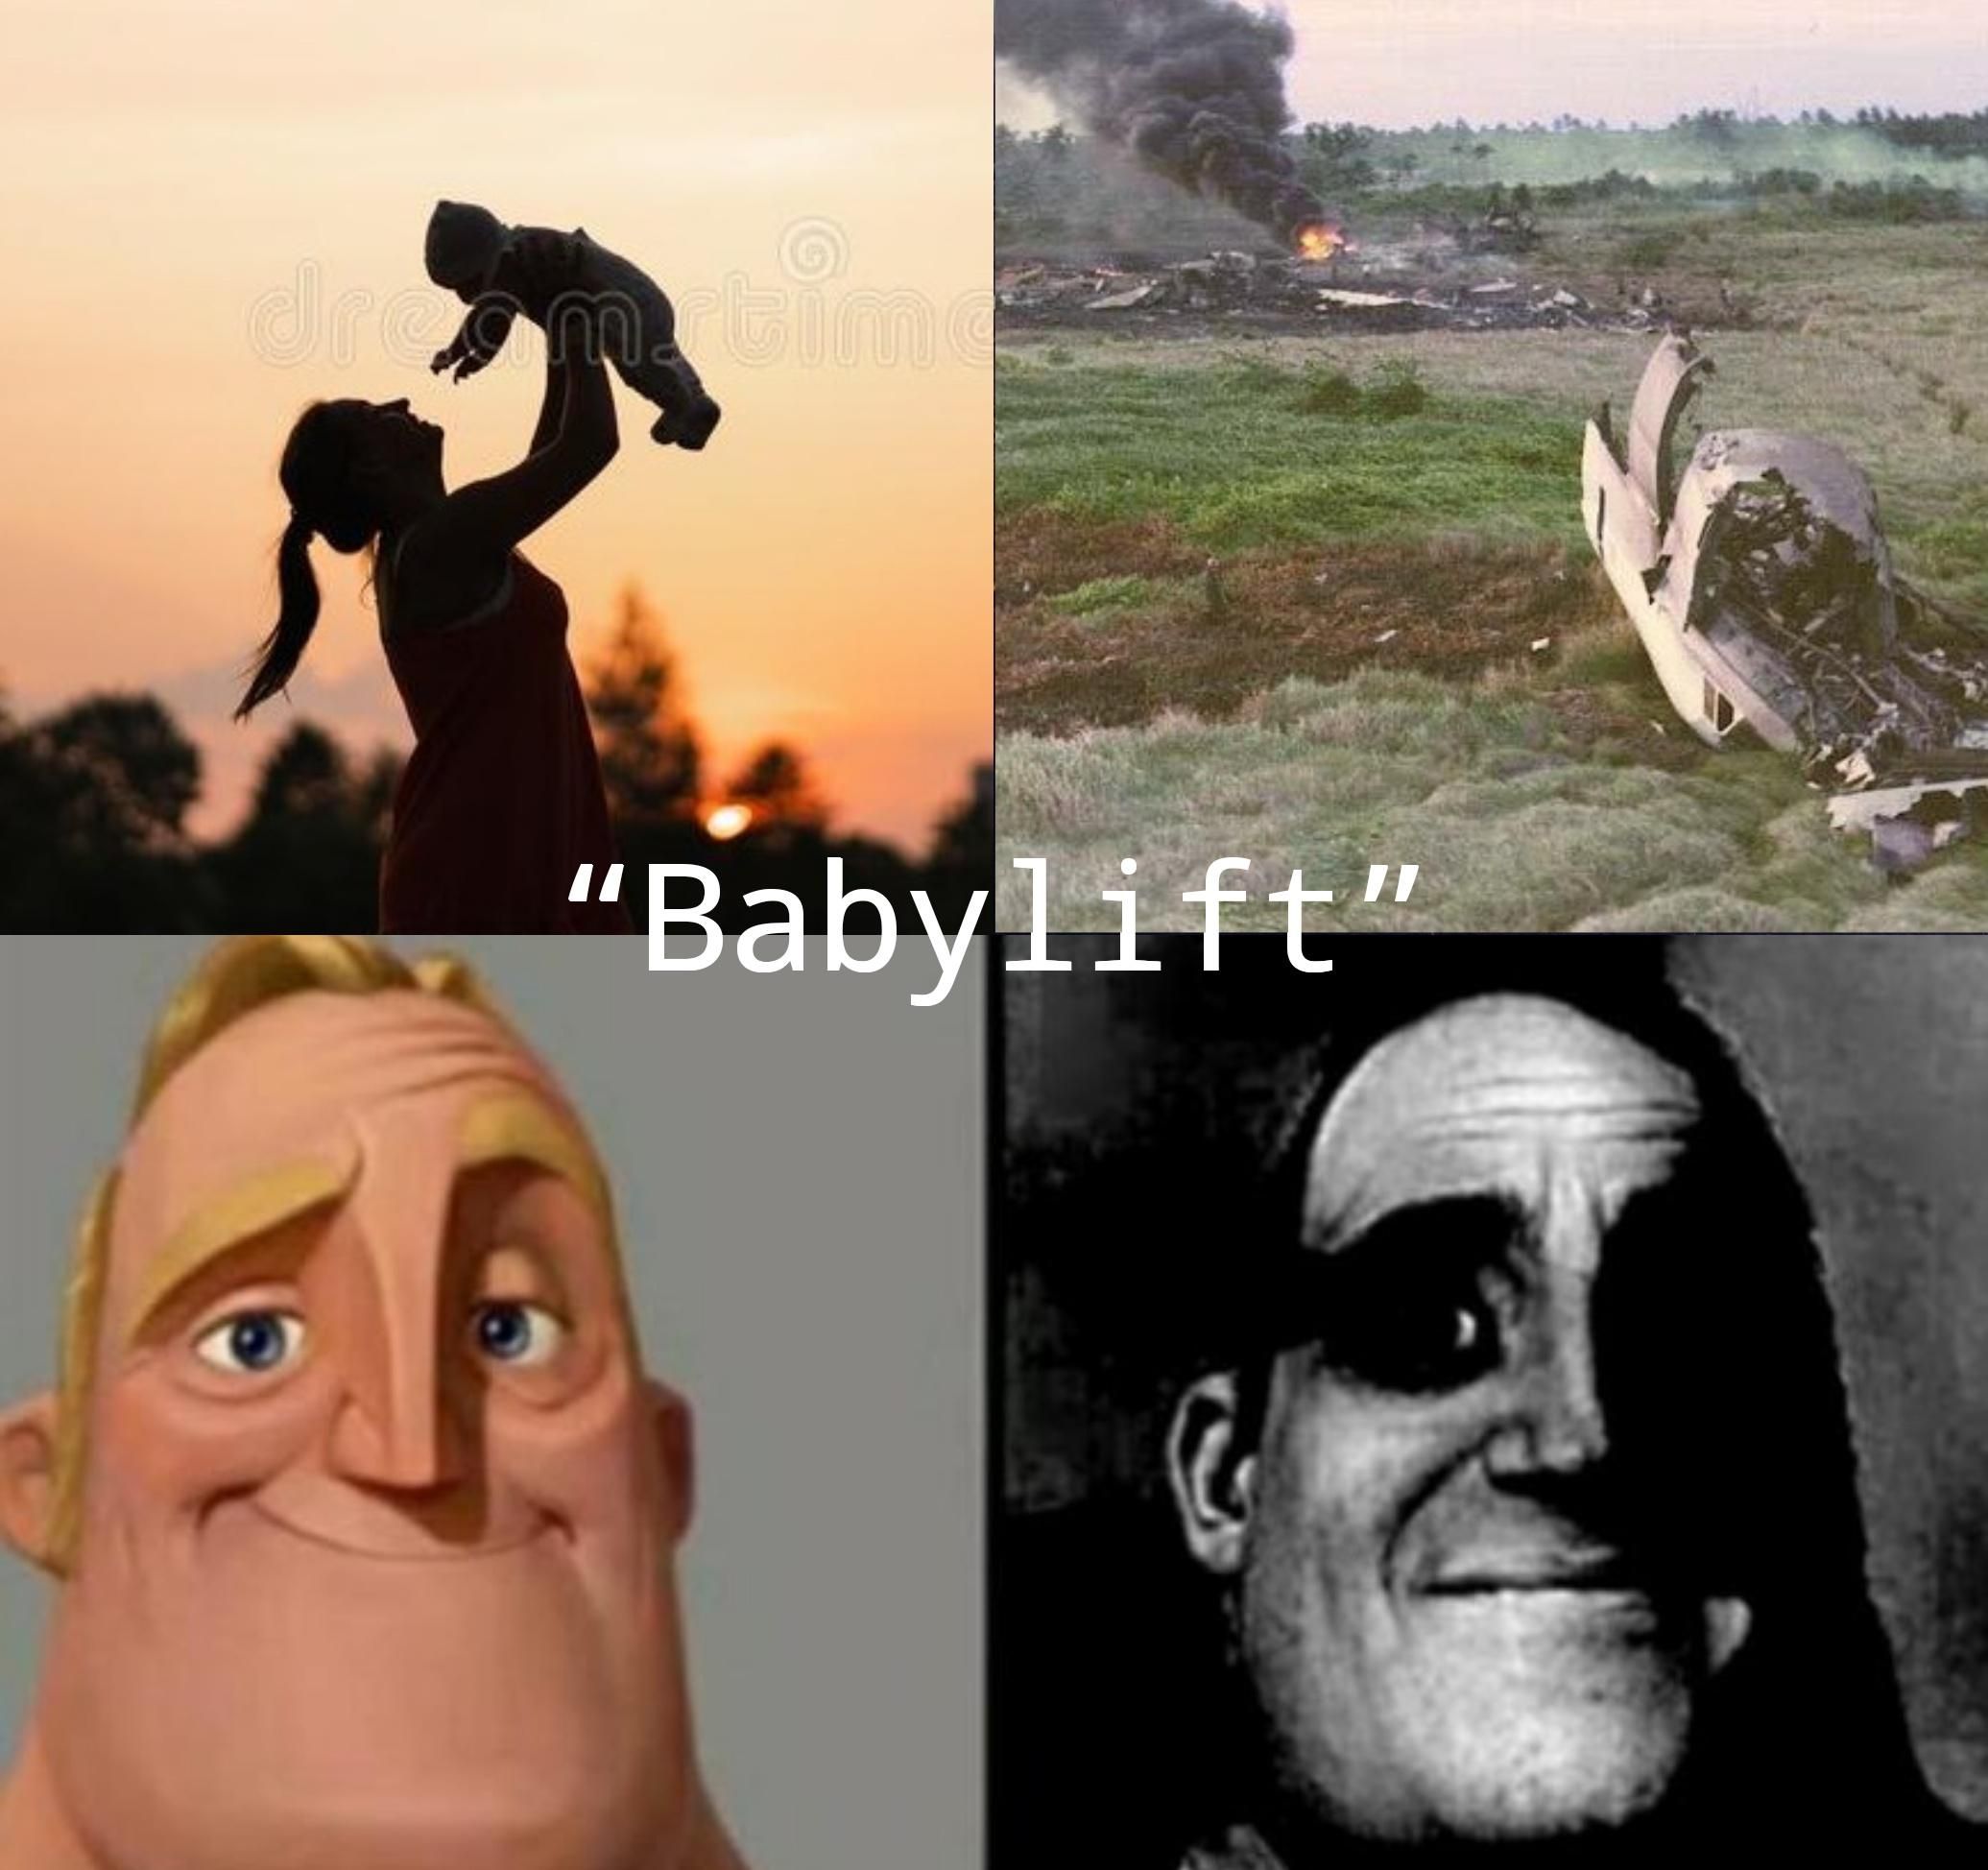 Operation Babylift: if you know, you know.